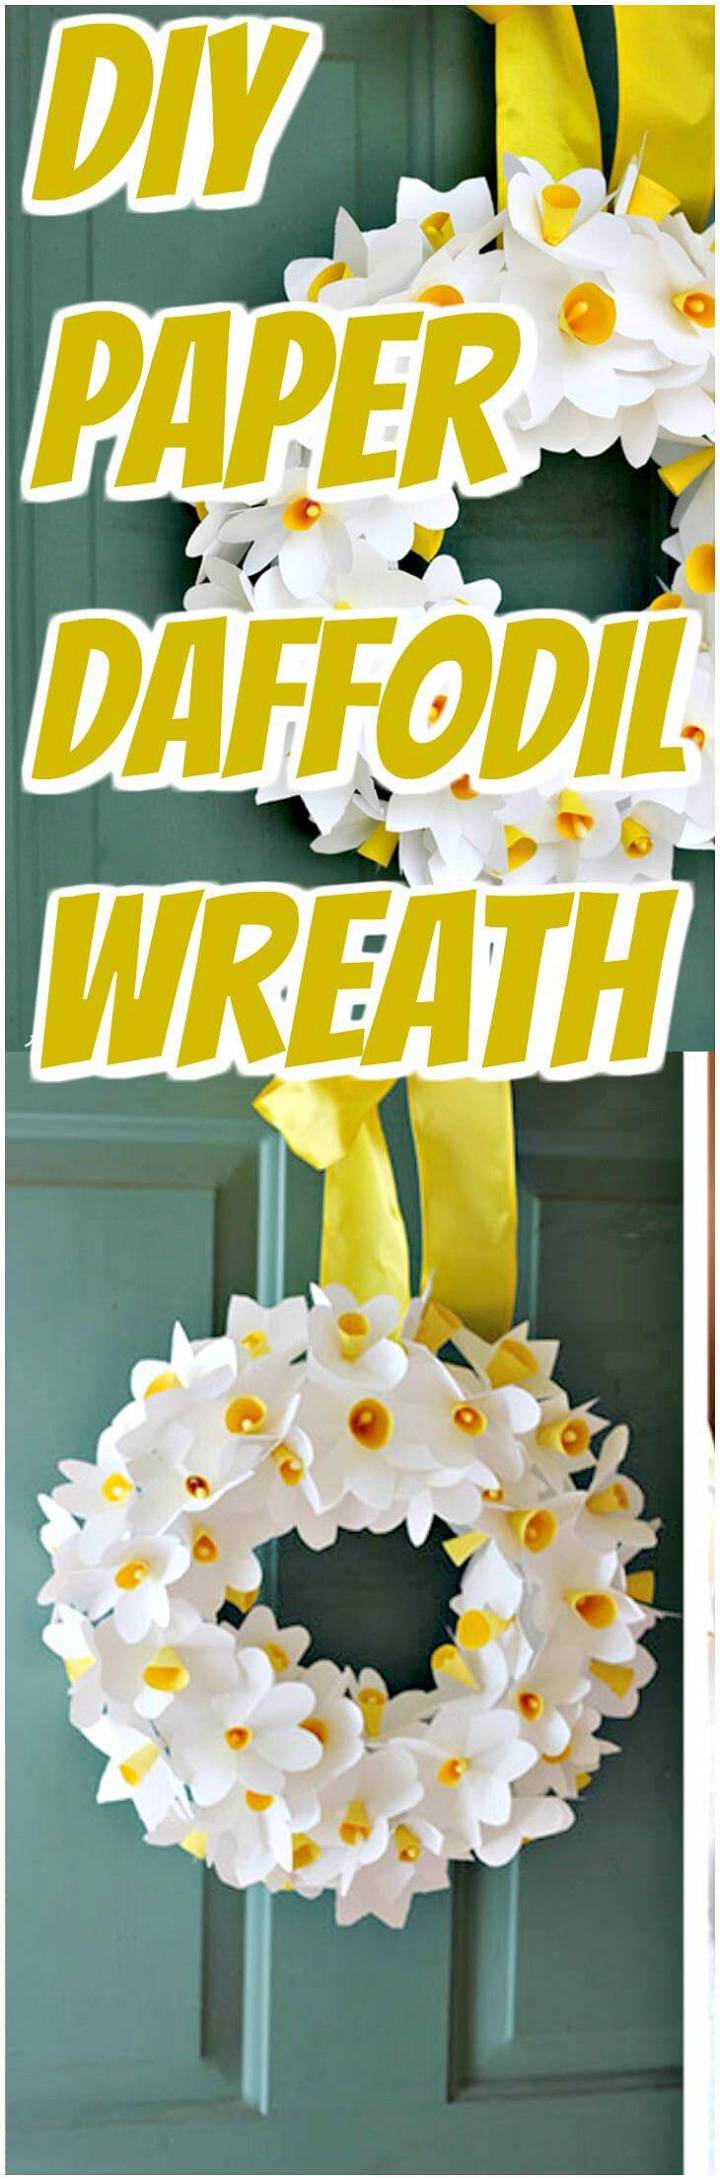 handcrafted paper daffoil wreath